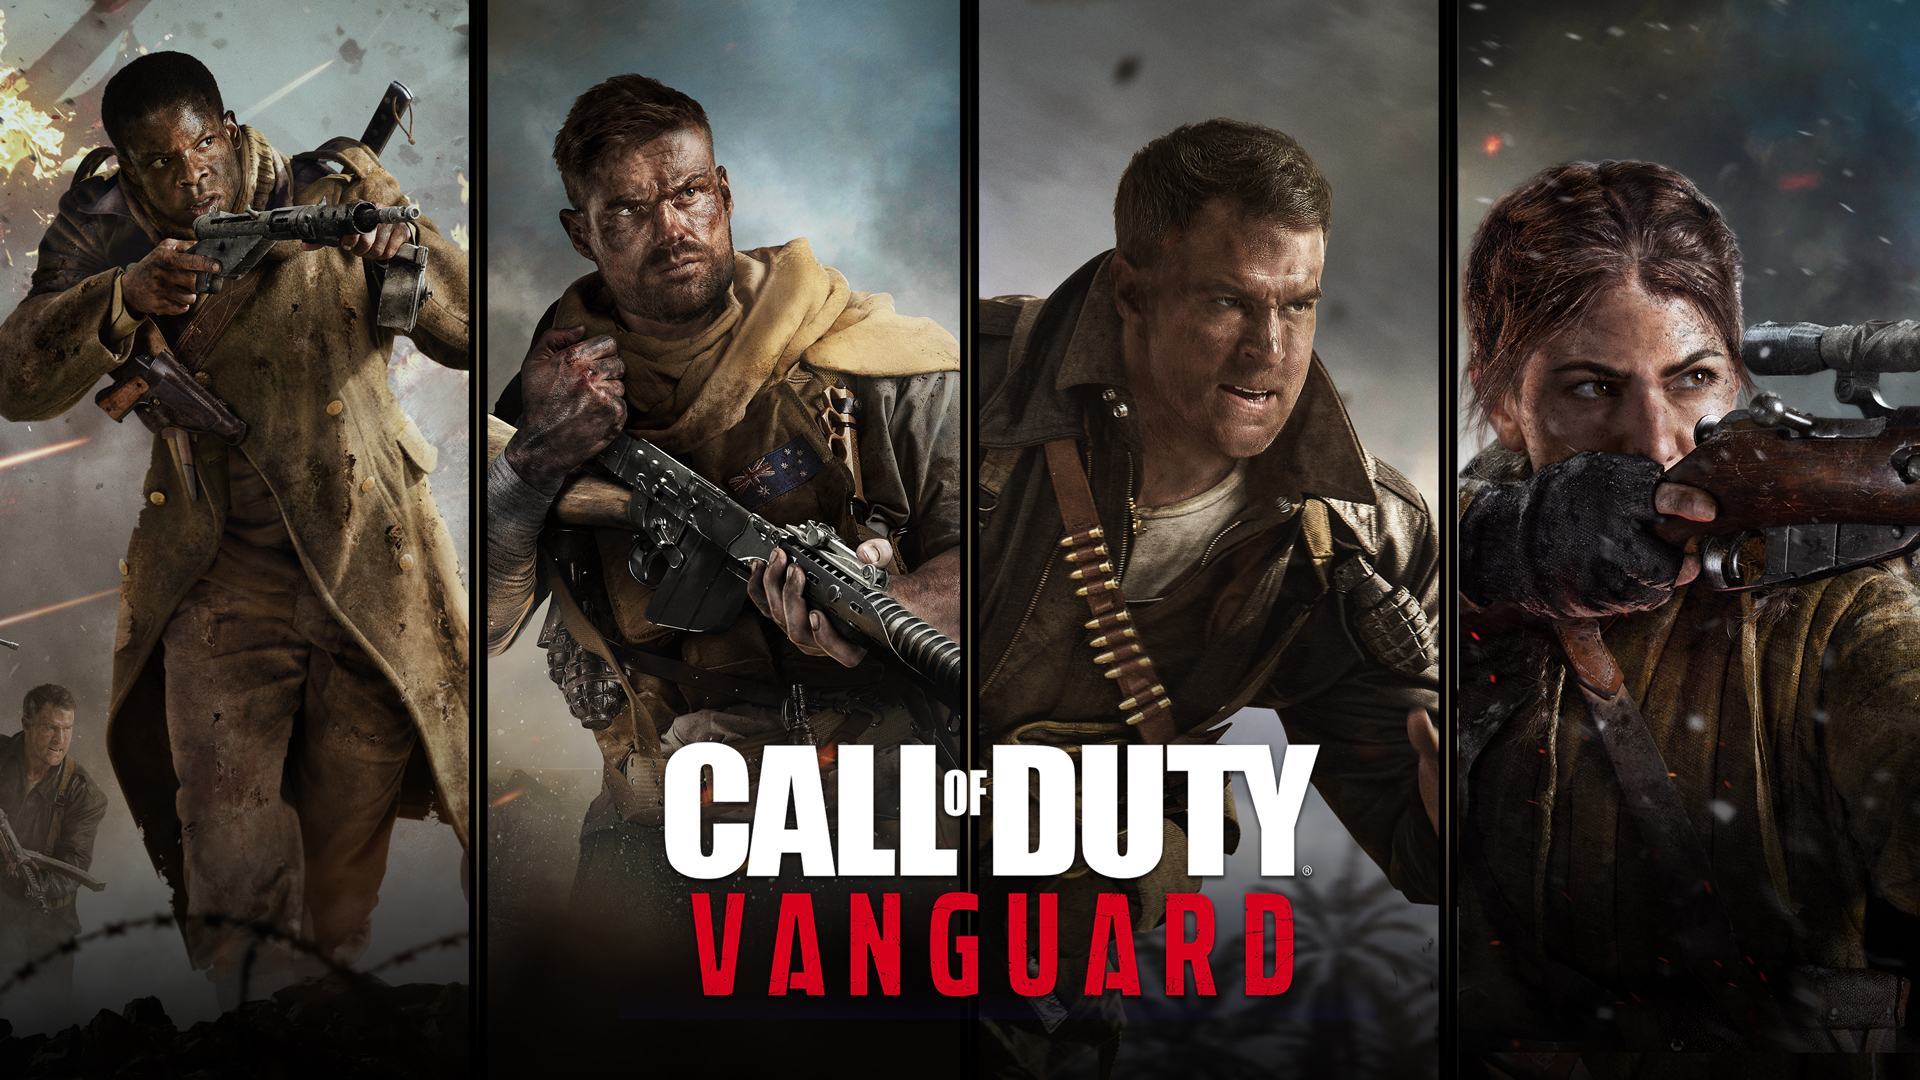 Why Call of Duty: Vanguard Has The Potential To Become The Best COD Game Of All-Time